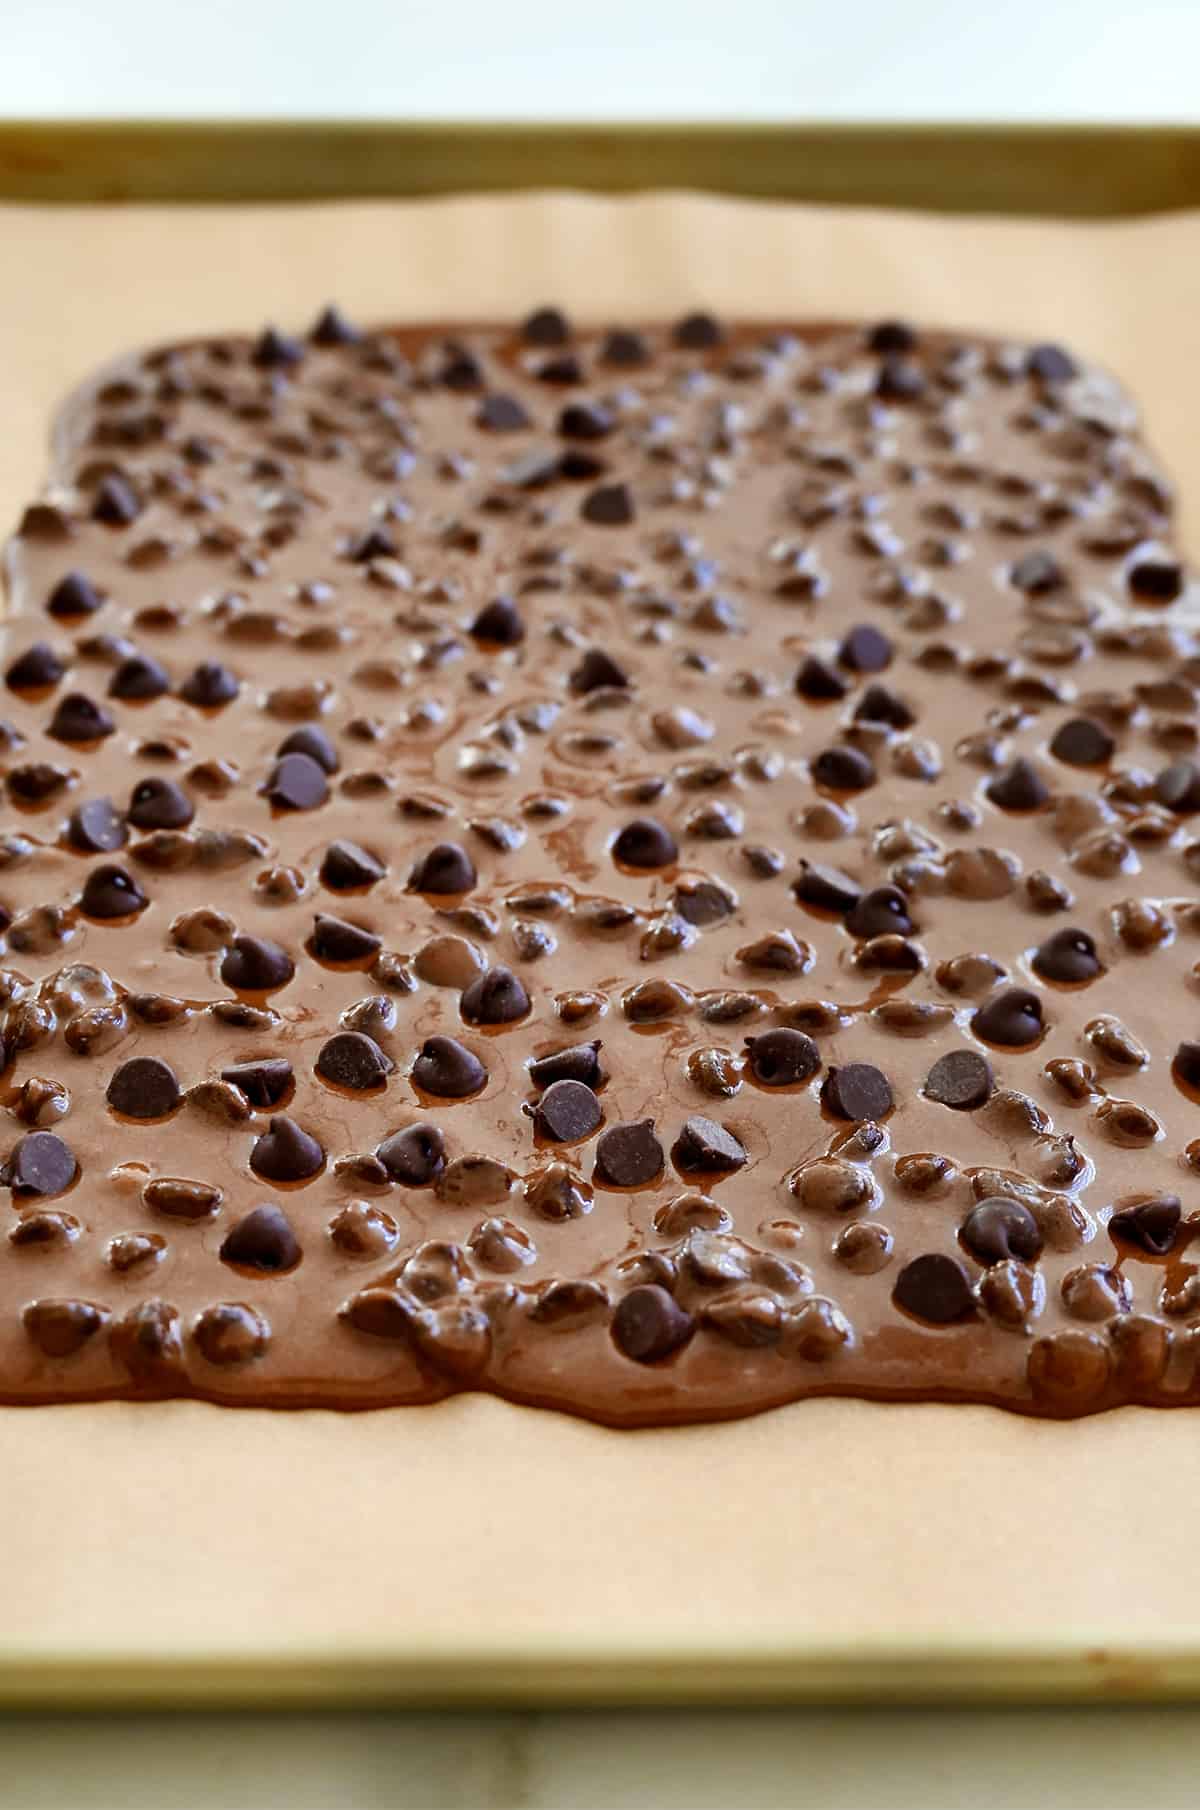 Brownie batter spread thinly atop parchment paper on a baking sheet.